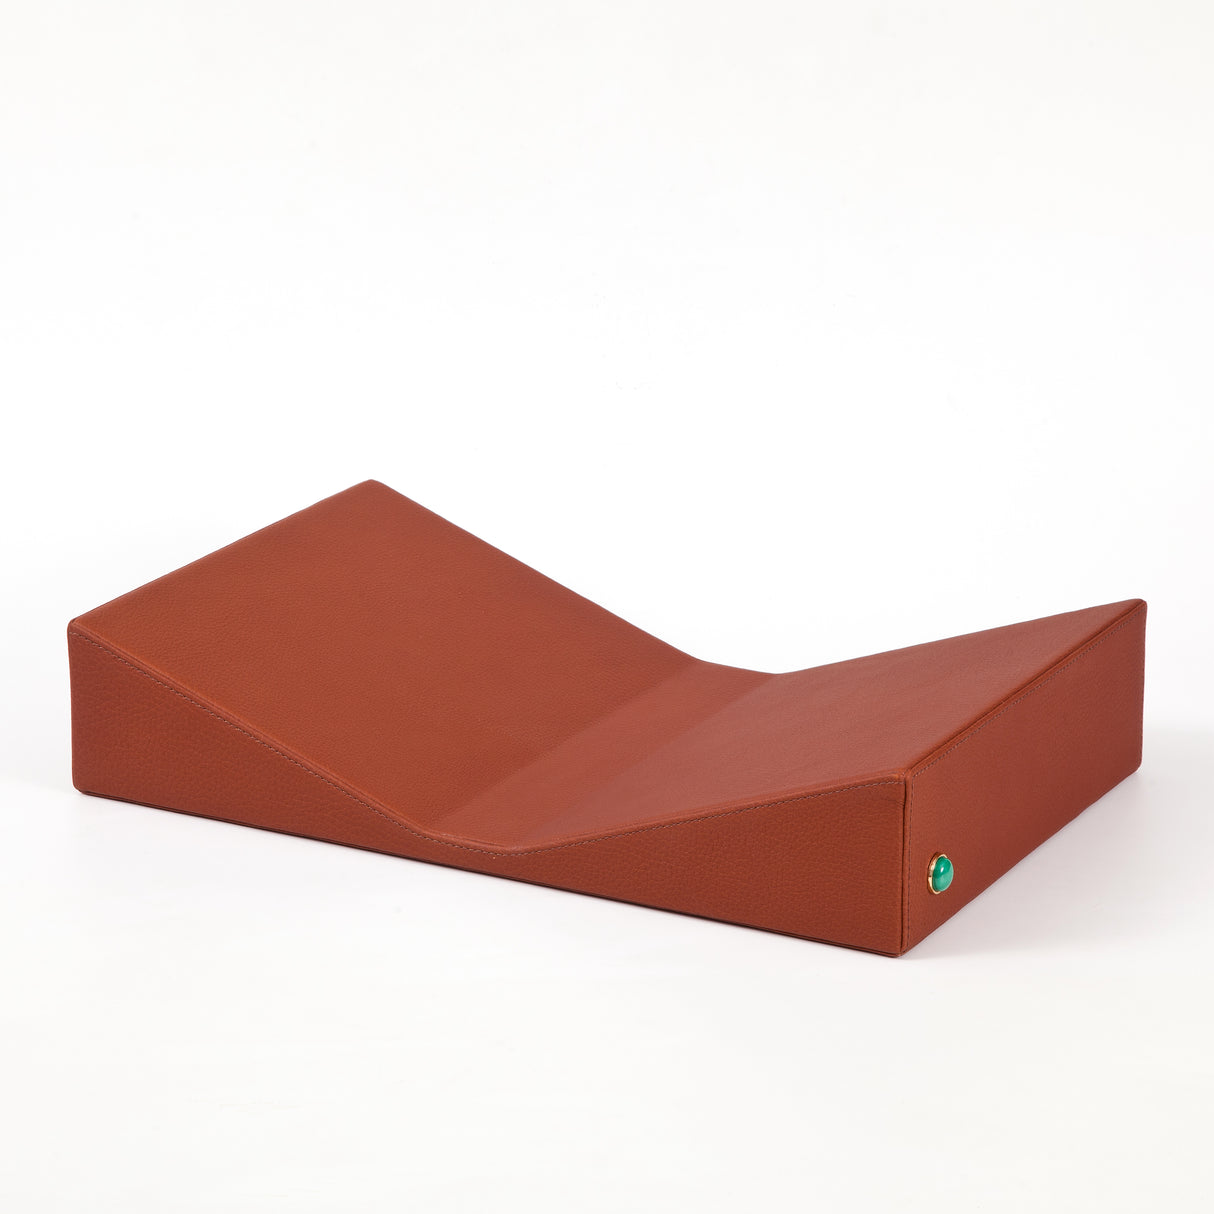 Functional, yet sculptural. Display your favorite book front and center.  %100 Floater Leather, Natural Malachite